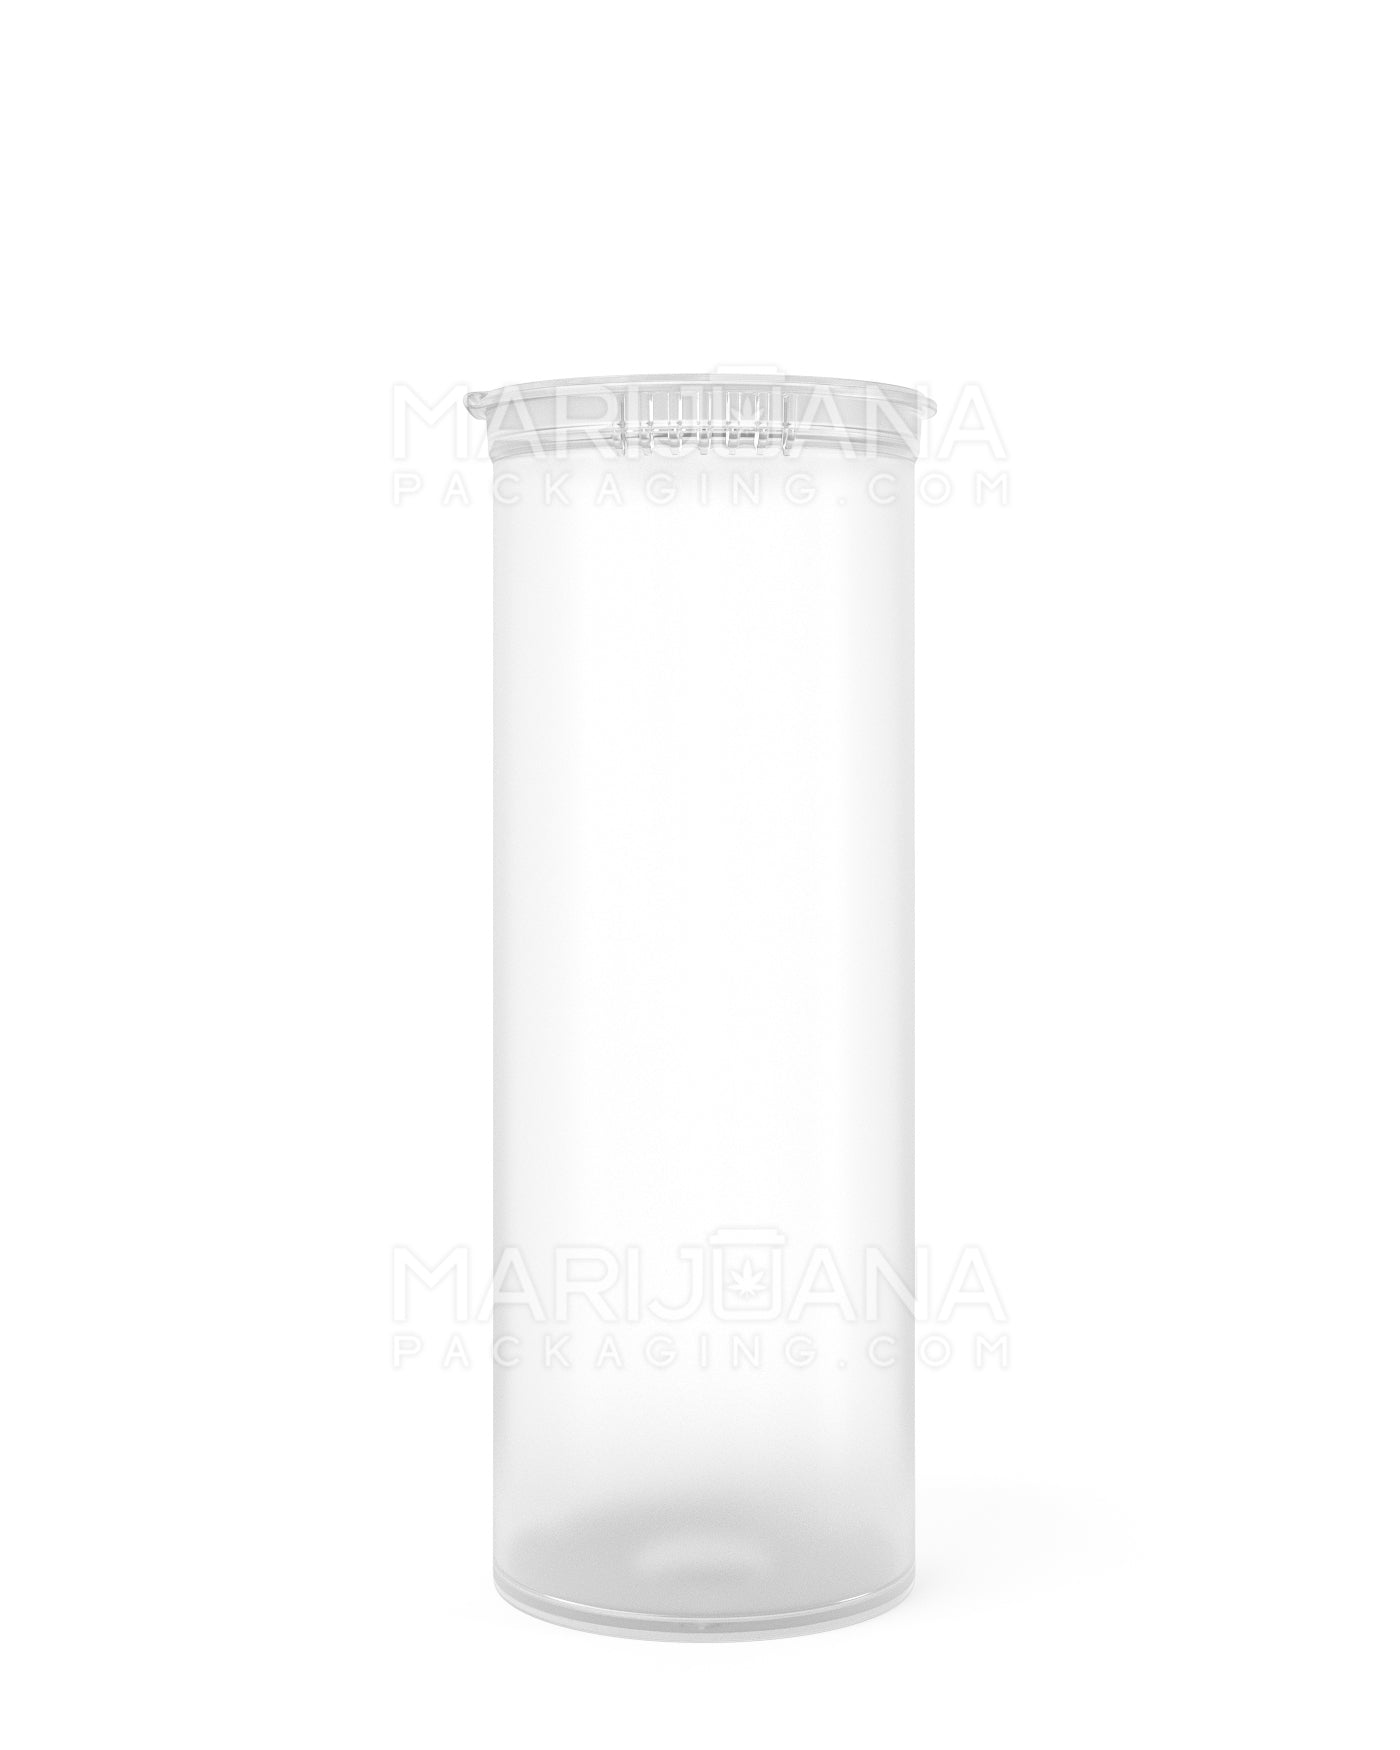 Child Resistant & Sustainable | 100% Biodegradable Clear Pop Top Bottles | 60dr - 14g - 75 Count - 2